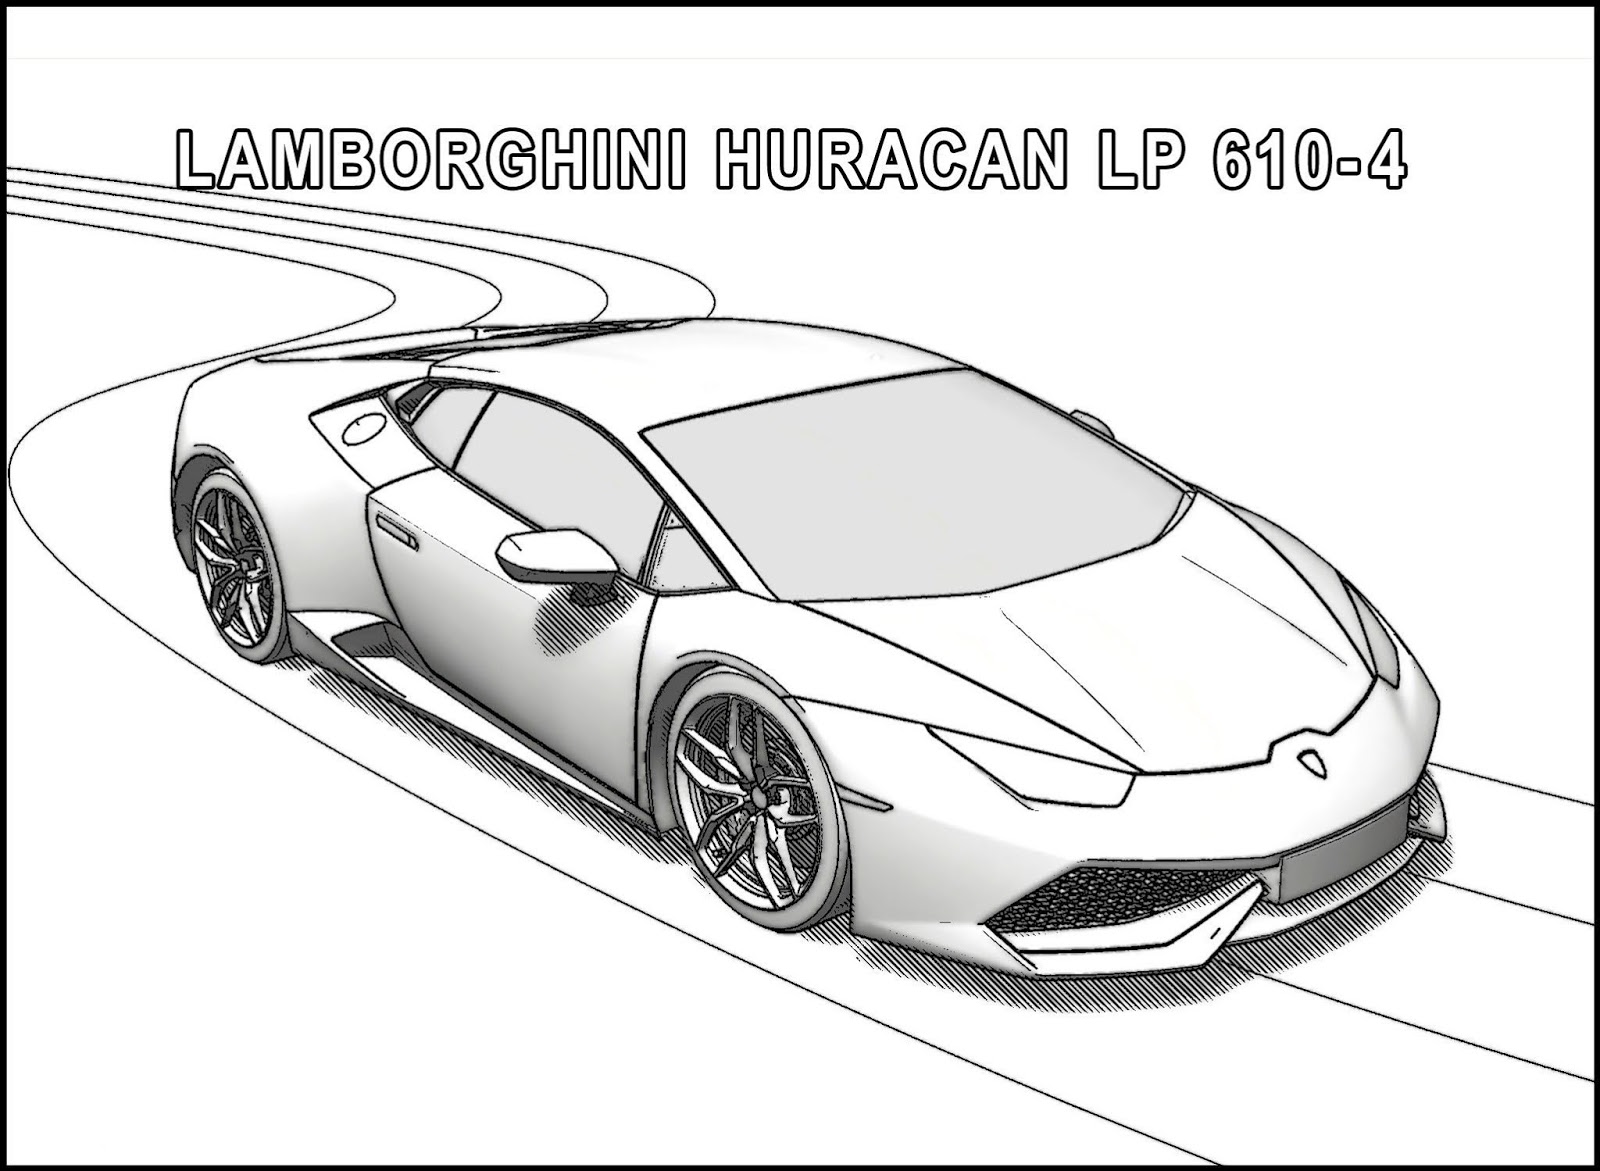 Download Lamborghini Huracan LP 610 4 Coloring Page - Free Printable Coloring Pages for Kids